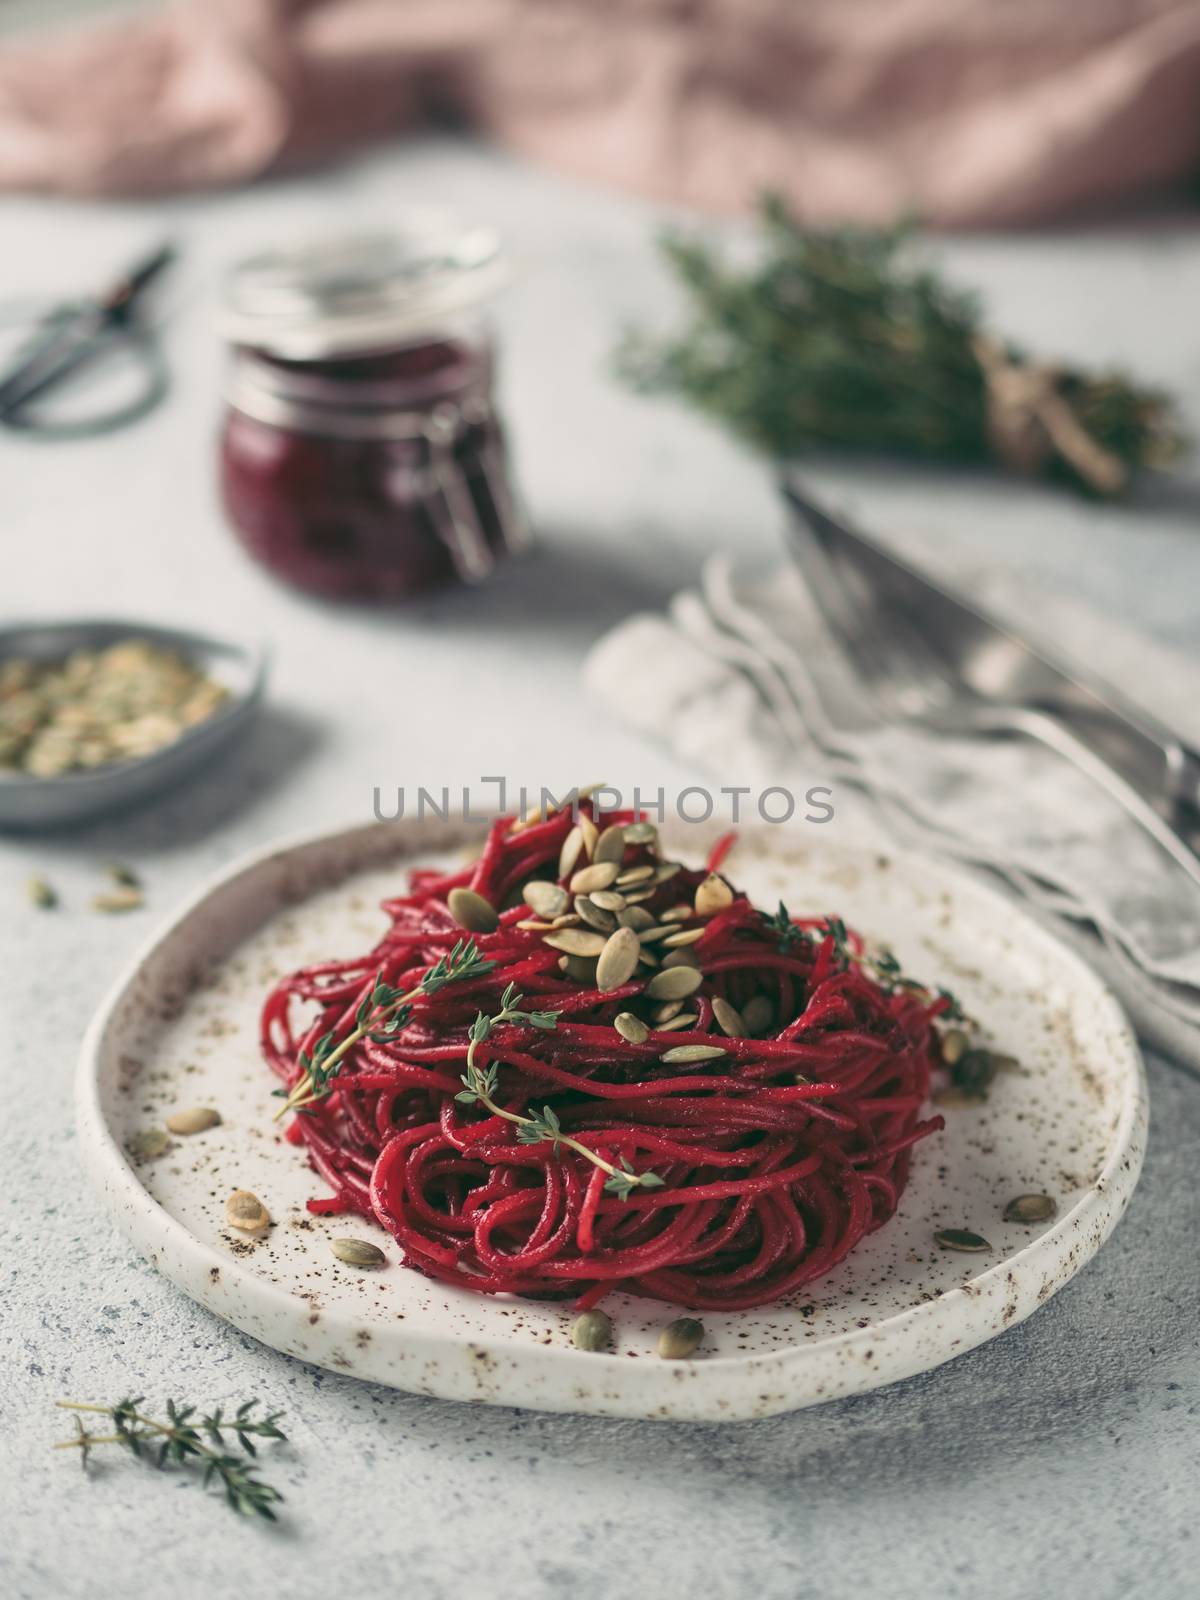 Beetroot pesto or hummus. Homemade beet pesto sauce in glass jar and fresh thyme on dark black background. Copy space for text. Ideas and recipes for healthy vegetarian detox diet food